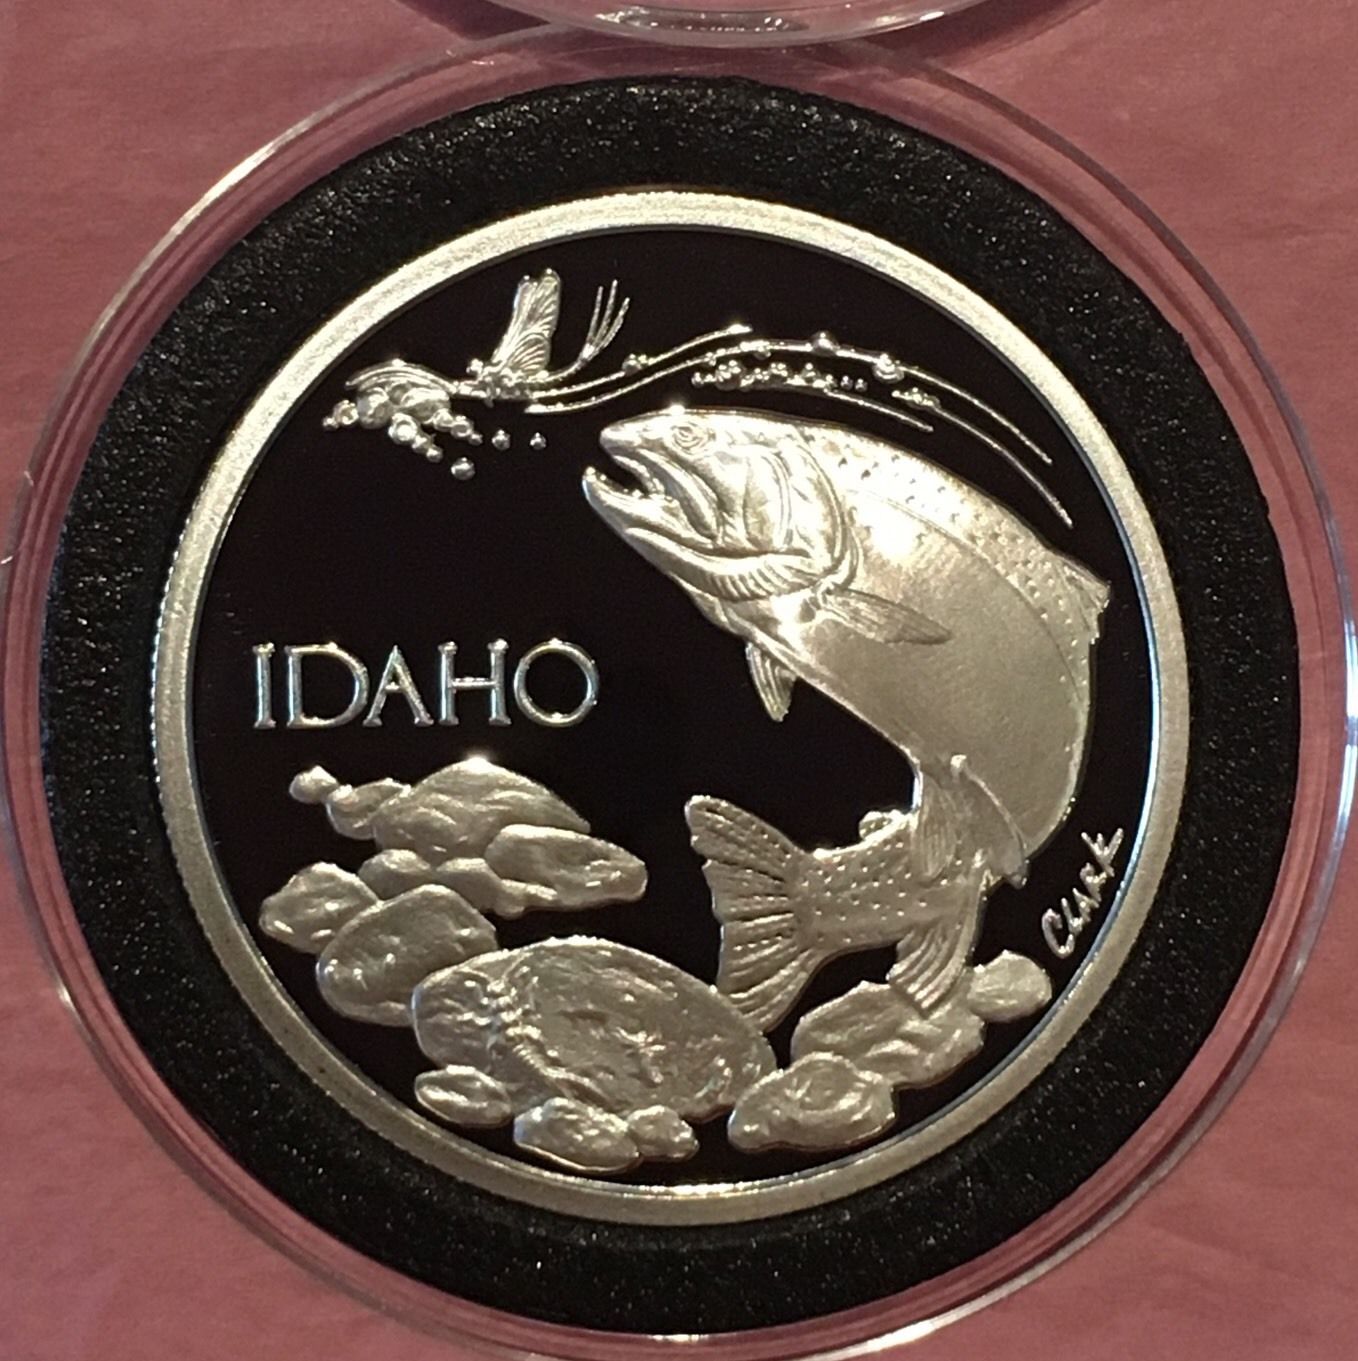 Idaho Trout Fish Proof Collectible Coin 1 Troy Oz .999 Fine Silver Round Scarce